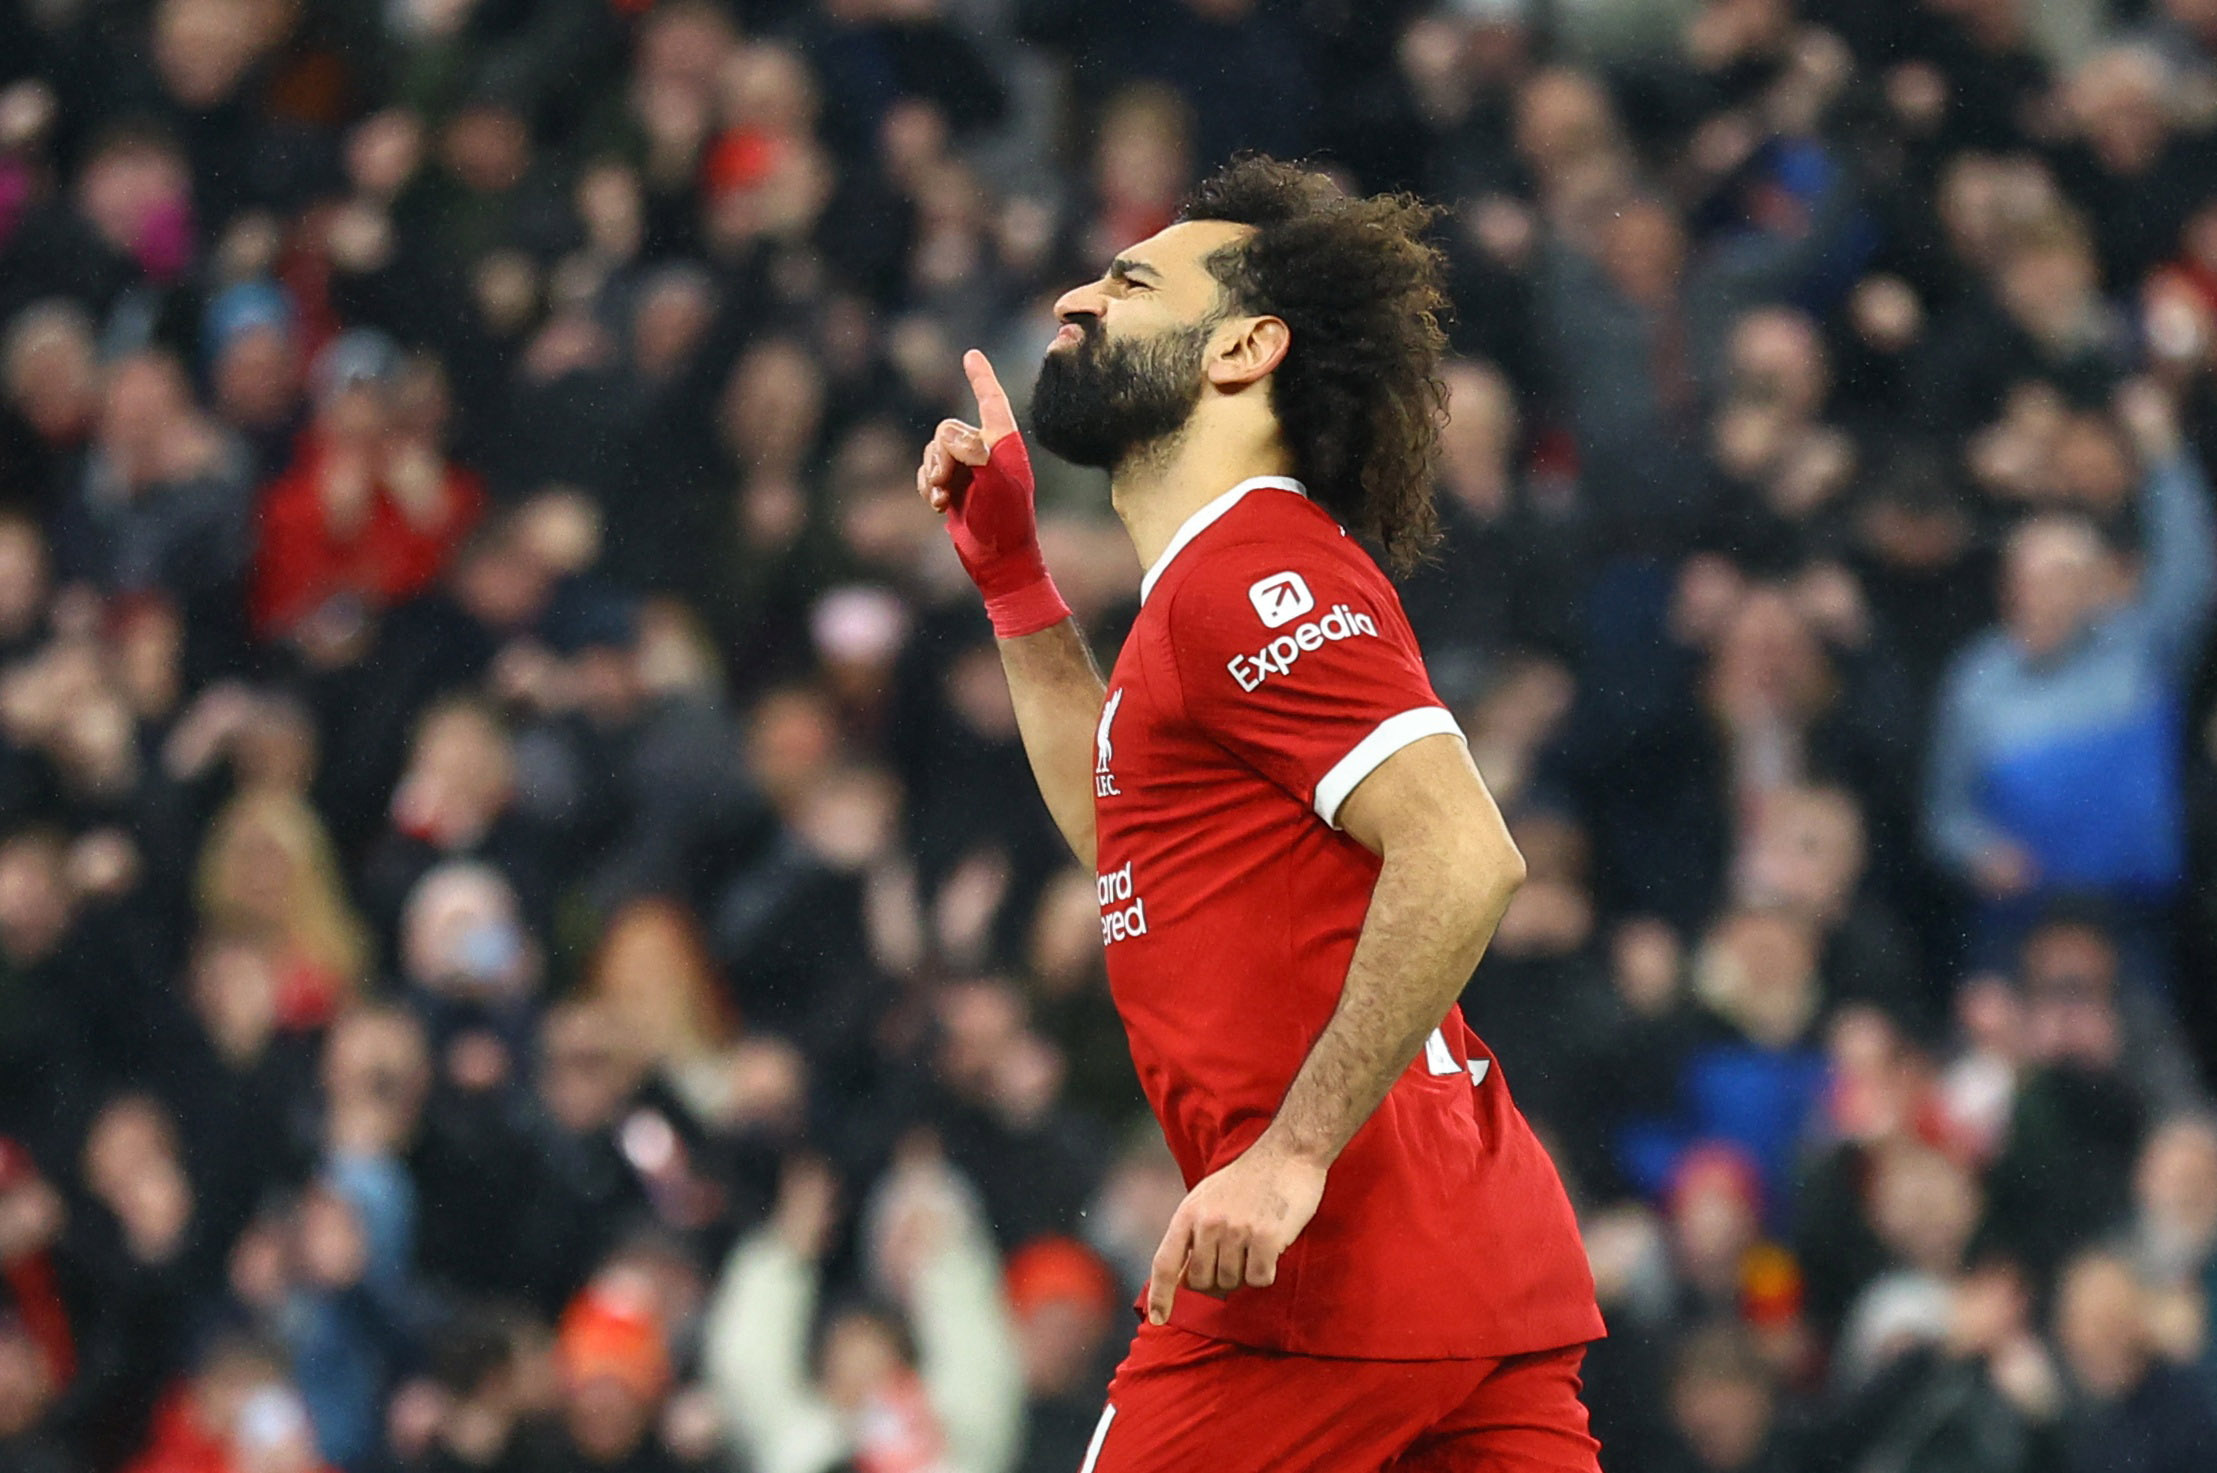 Mohamed Salah's celebration after scoring a brace for Liverpool against Newcastle in EPL GW 20 | EPL Results | Mania Africa